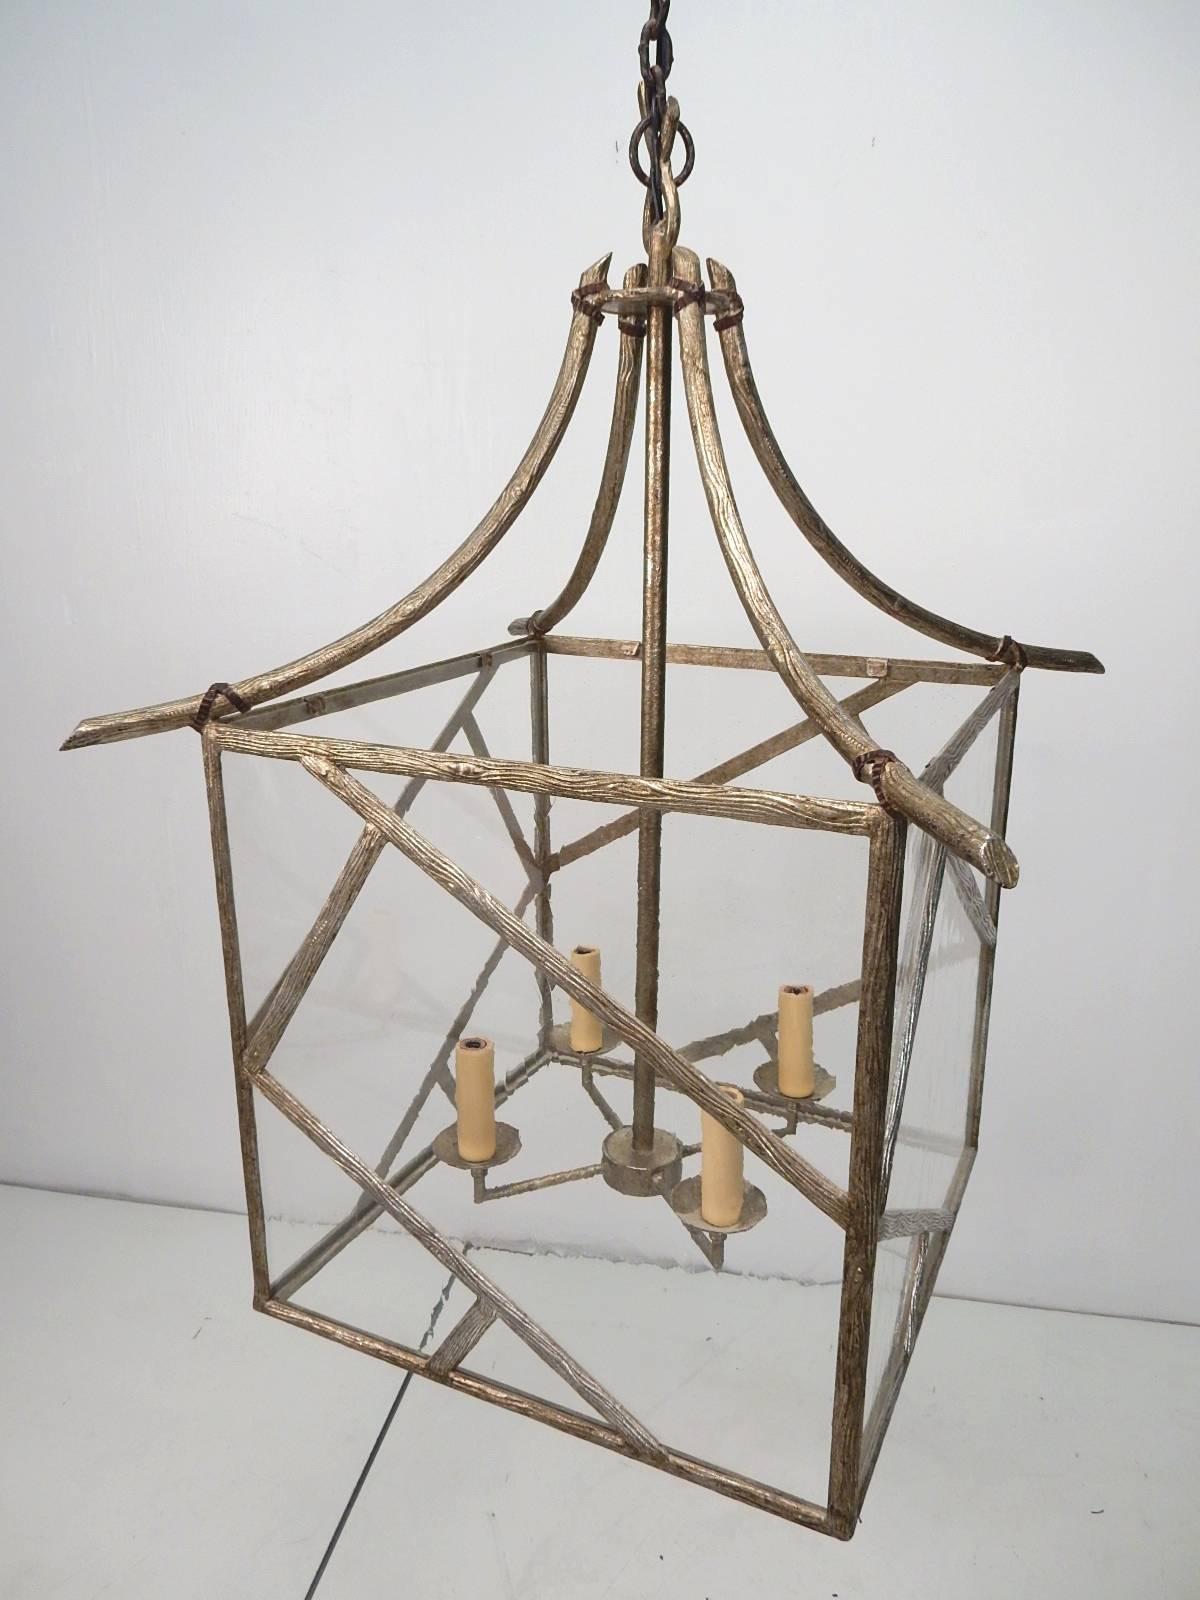 Enormous faux bois twig Pagoda chandelier made of brass with platinum finish, circa 1970s
Over 2 feet wide and 3 feet tall with 6 foot wrought iron/hand-forged chain and 8 inch wide matching ceiling cap.
Thick mineral glass sides, four candle bulb